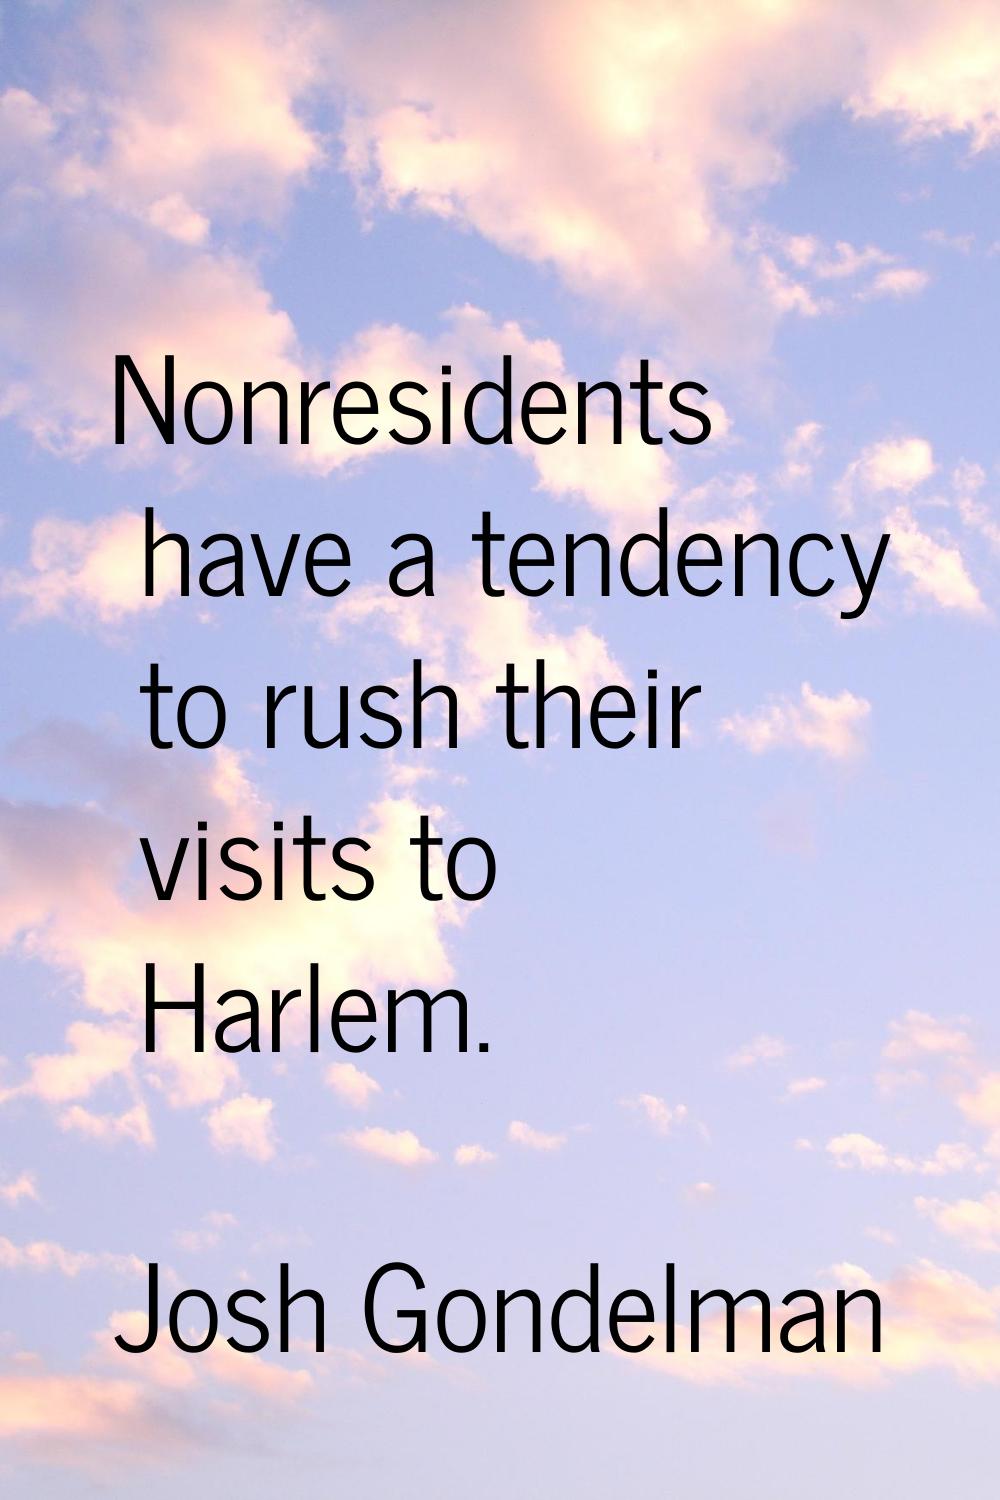 Nonresidents have a tendency to rush their visits to Harlem.